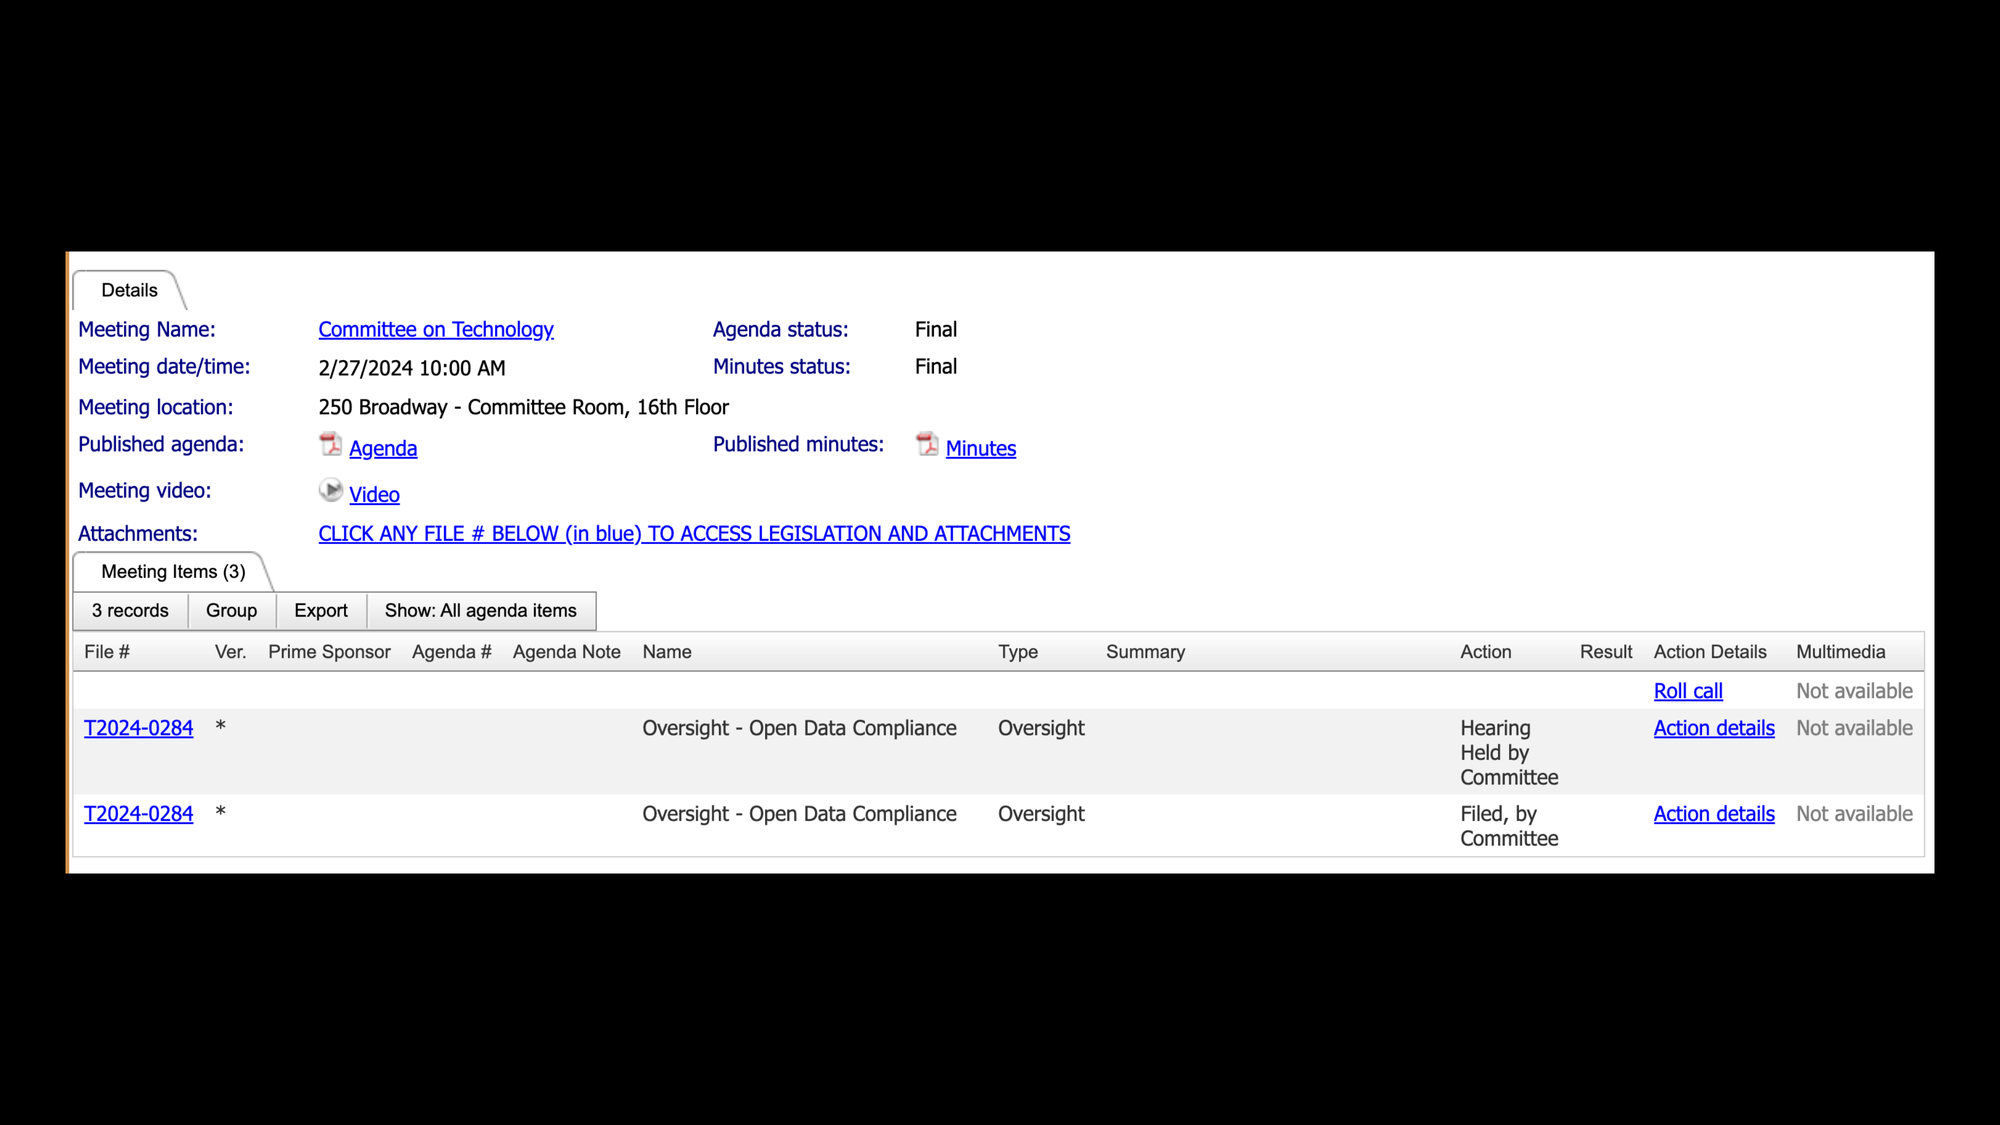 A screenshot of the Meeting Details page for a Committee on Technology meeting on Open Data Compliance in the NYC city council. It shows details on the meetings date, time, and location and has links to the Agenda, Minutes, Video. It also has a table of Meeting Items, with two items for T2024-0284, which is a record titled Oversight - Open Data Compliance with type Oversight. Each item has a different action: Hearing Held by Committee and Filed, by Committee.